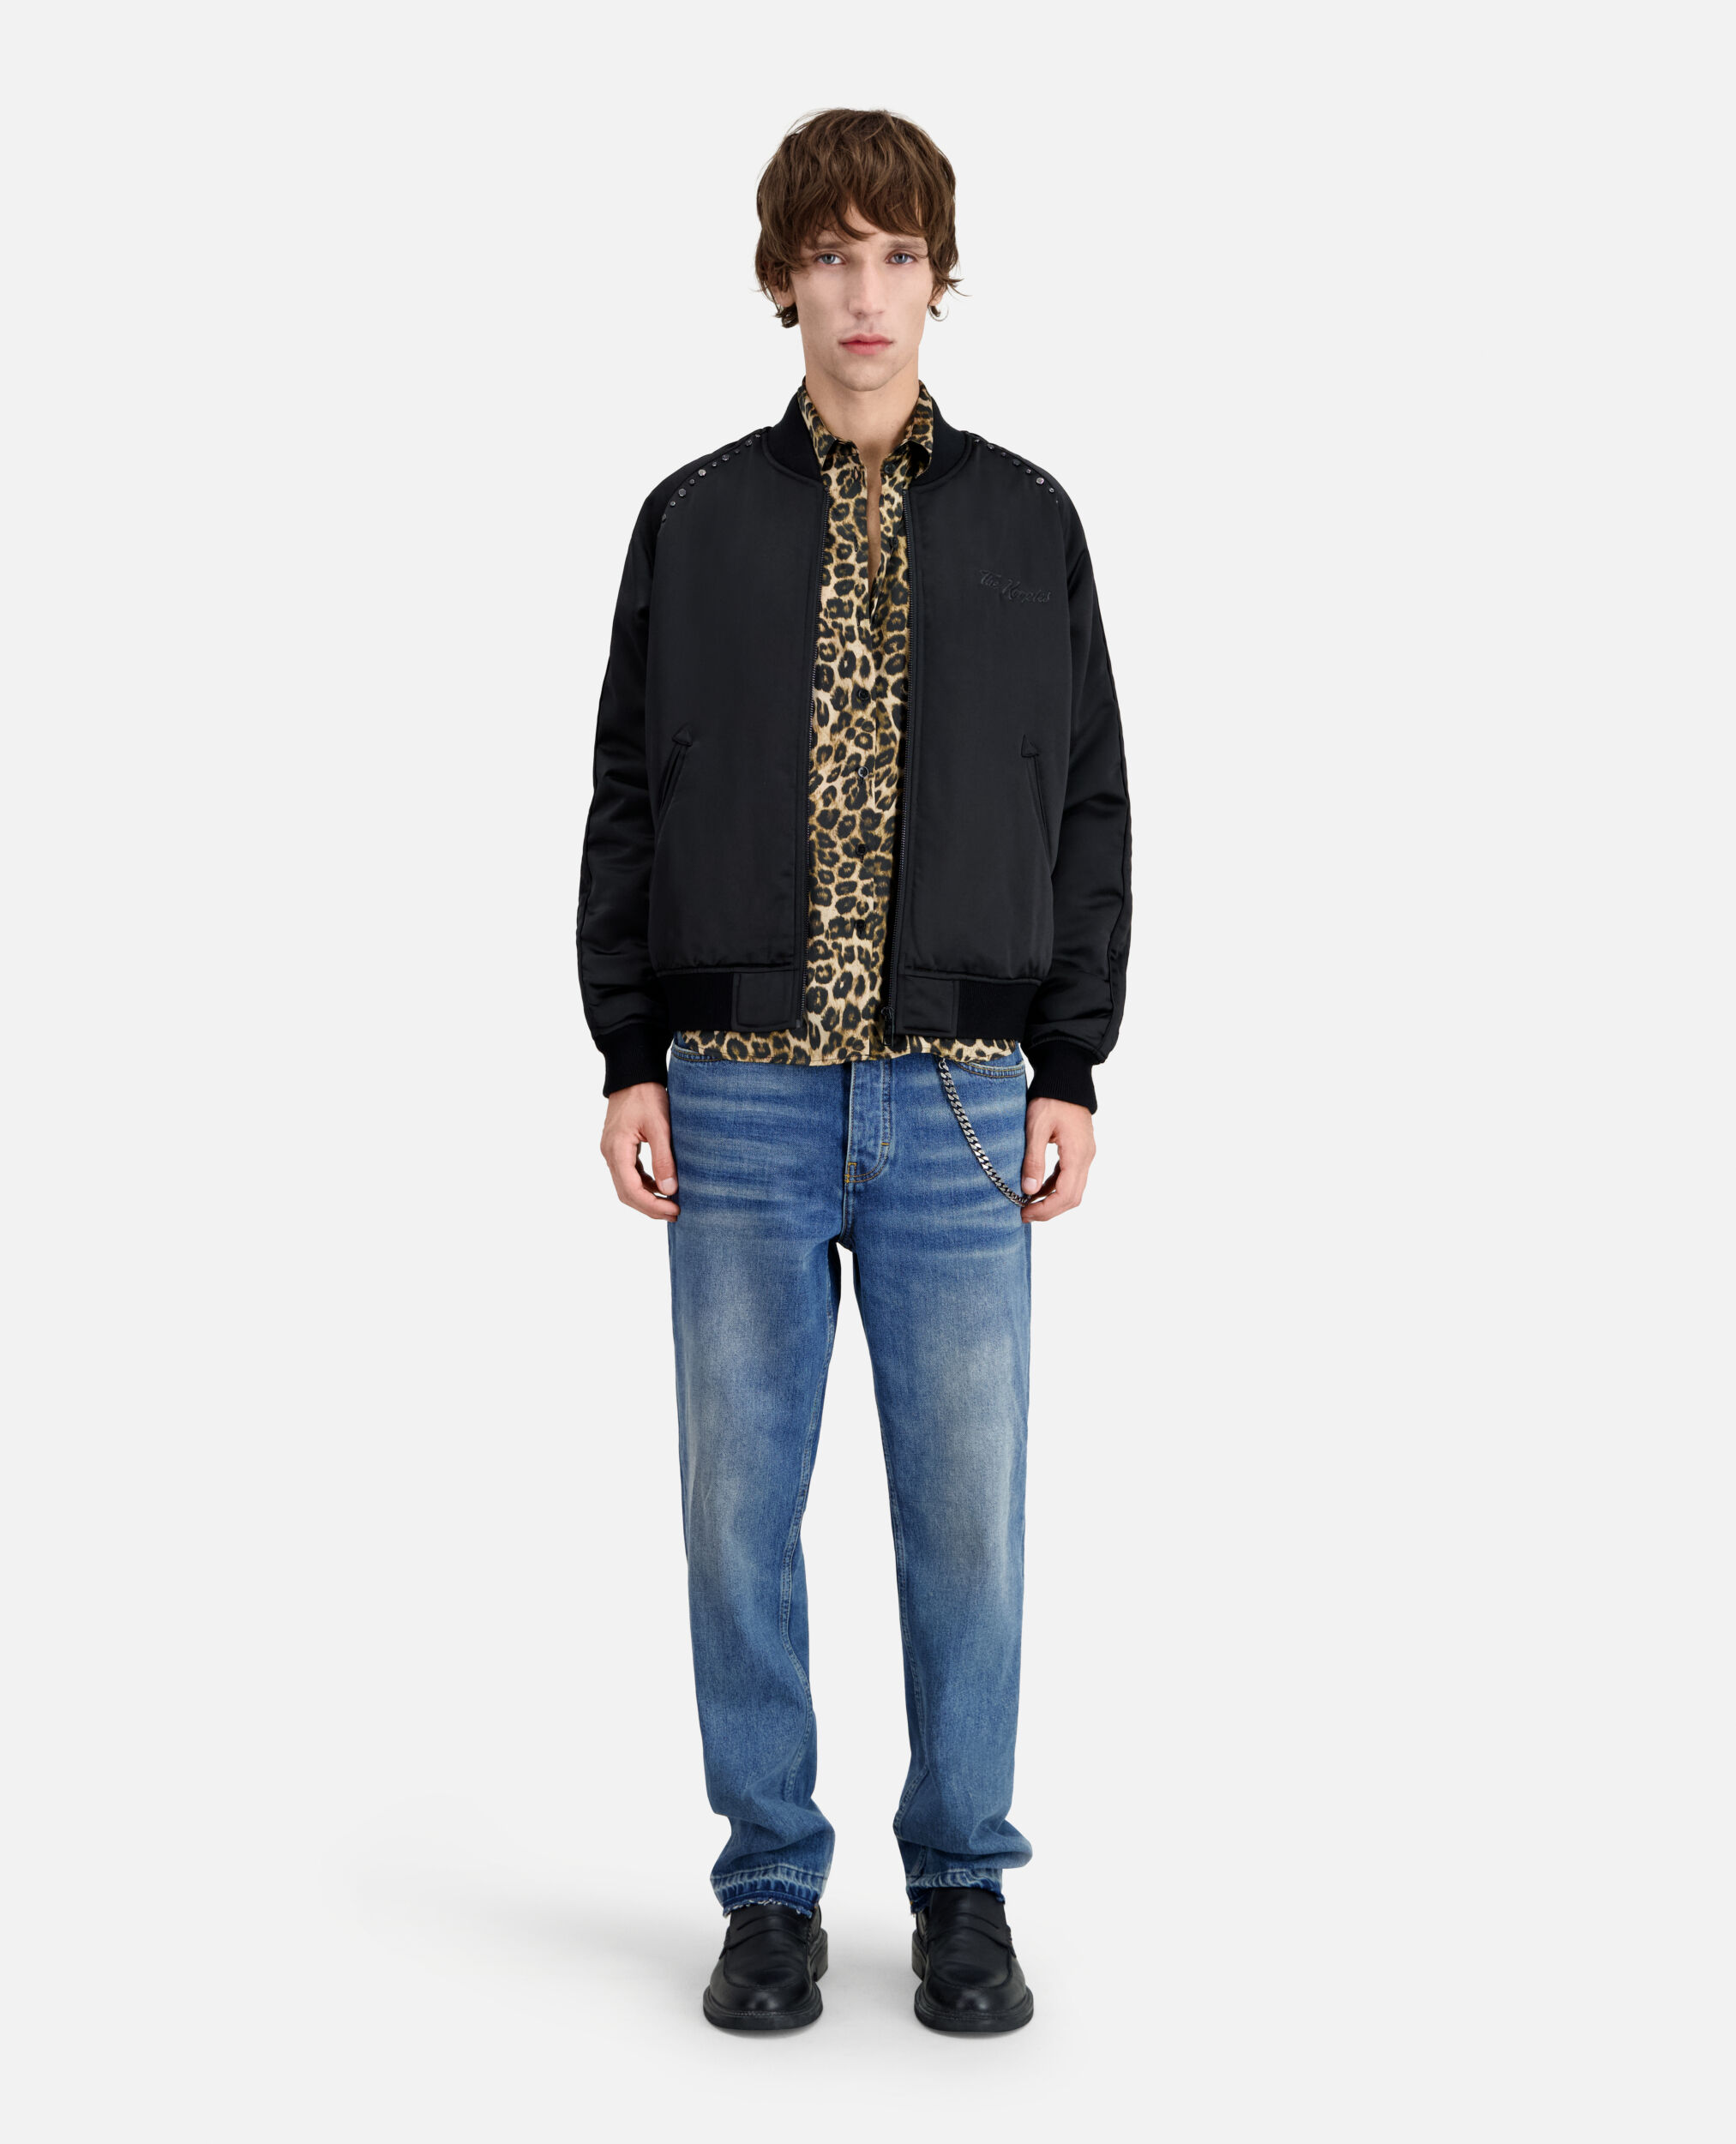 Black jacket with Wild tiger embroidery, BLACK, hi-res image number null